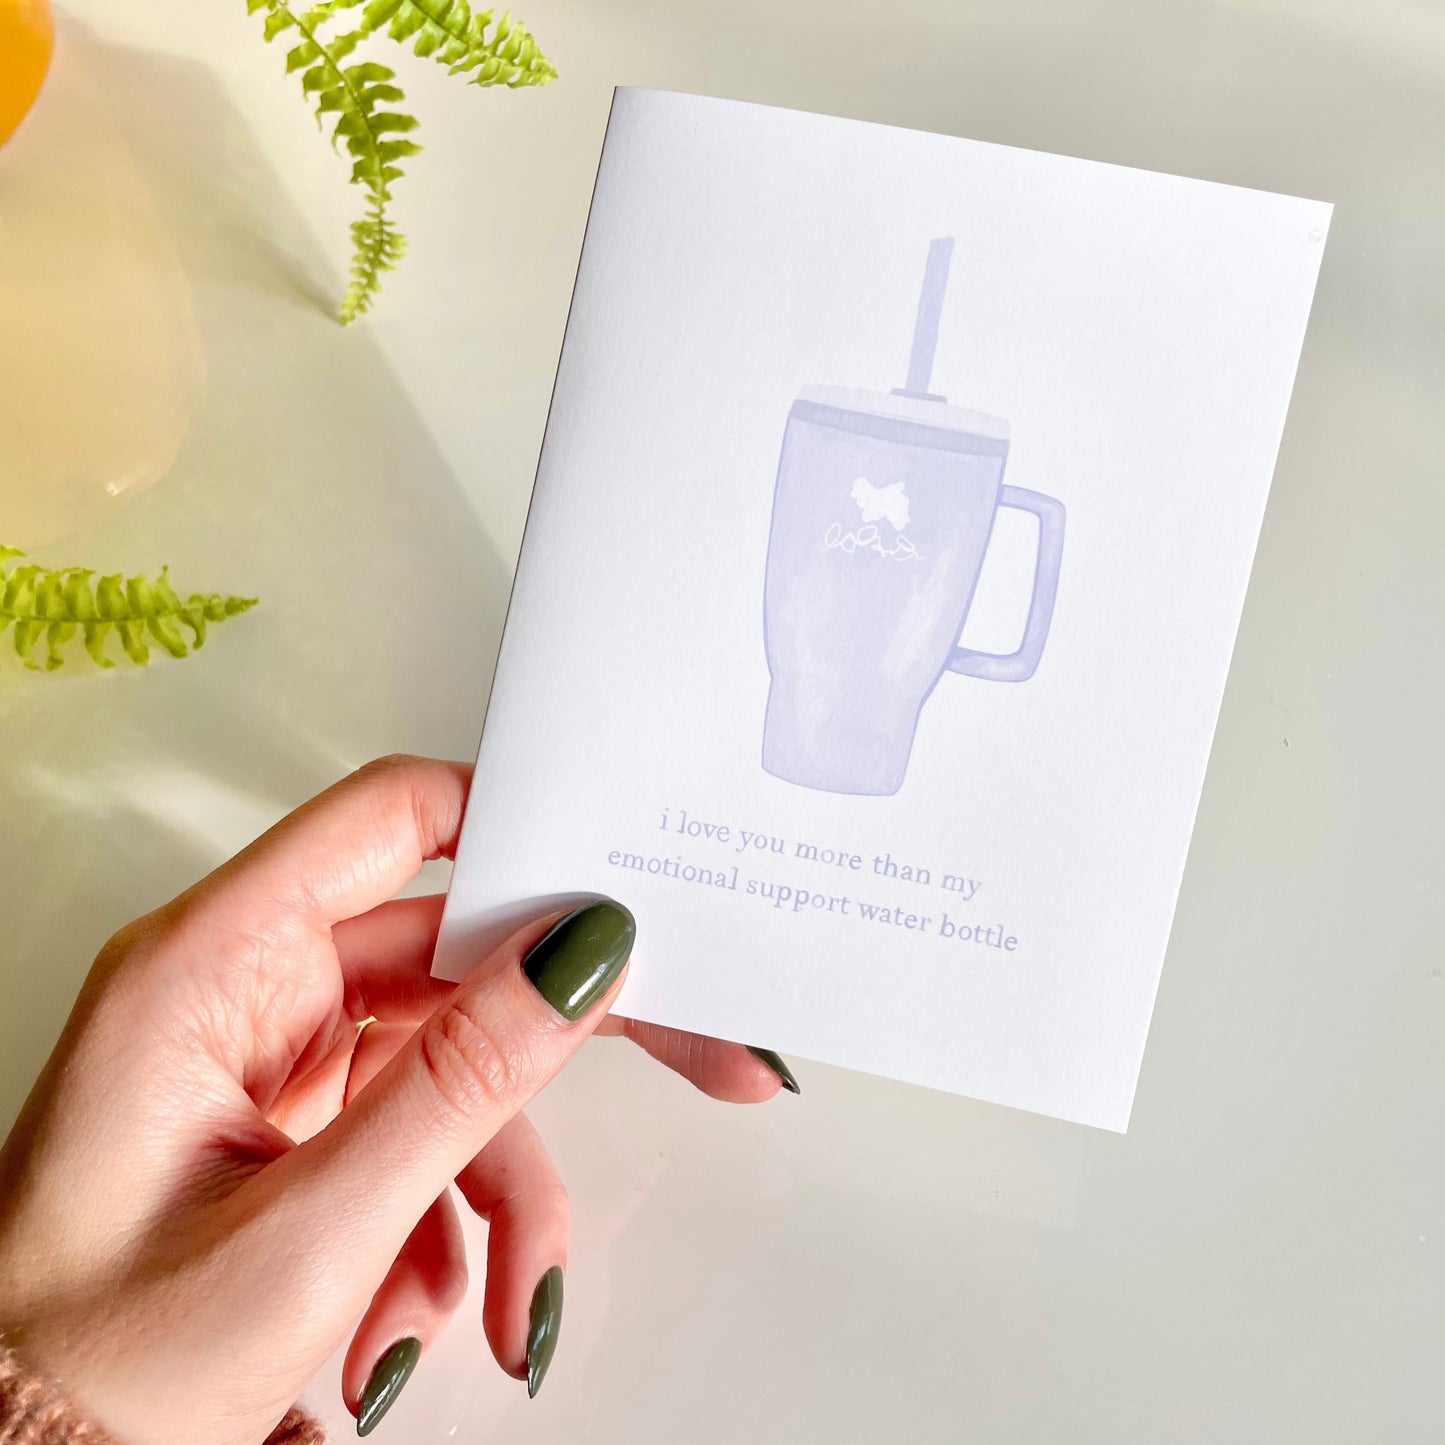 You know that one friend who doesn't go ANYWHERE without her water bottle? Well, we found the perfect card for her. Its features a hand-drawn image of a water bottle and the phrase "I love you more than my emotional support water bottle". This card pairs best with a brand new emotional support water bottle, because you can never have too many!